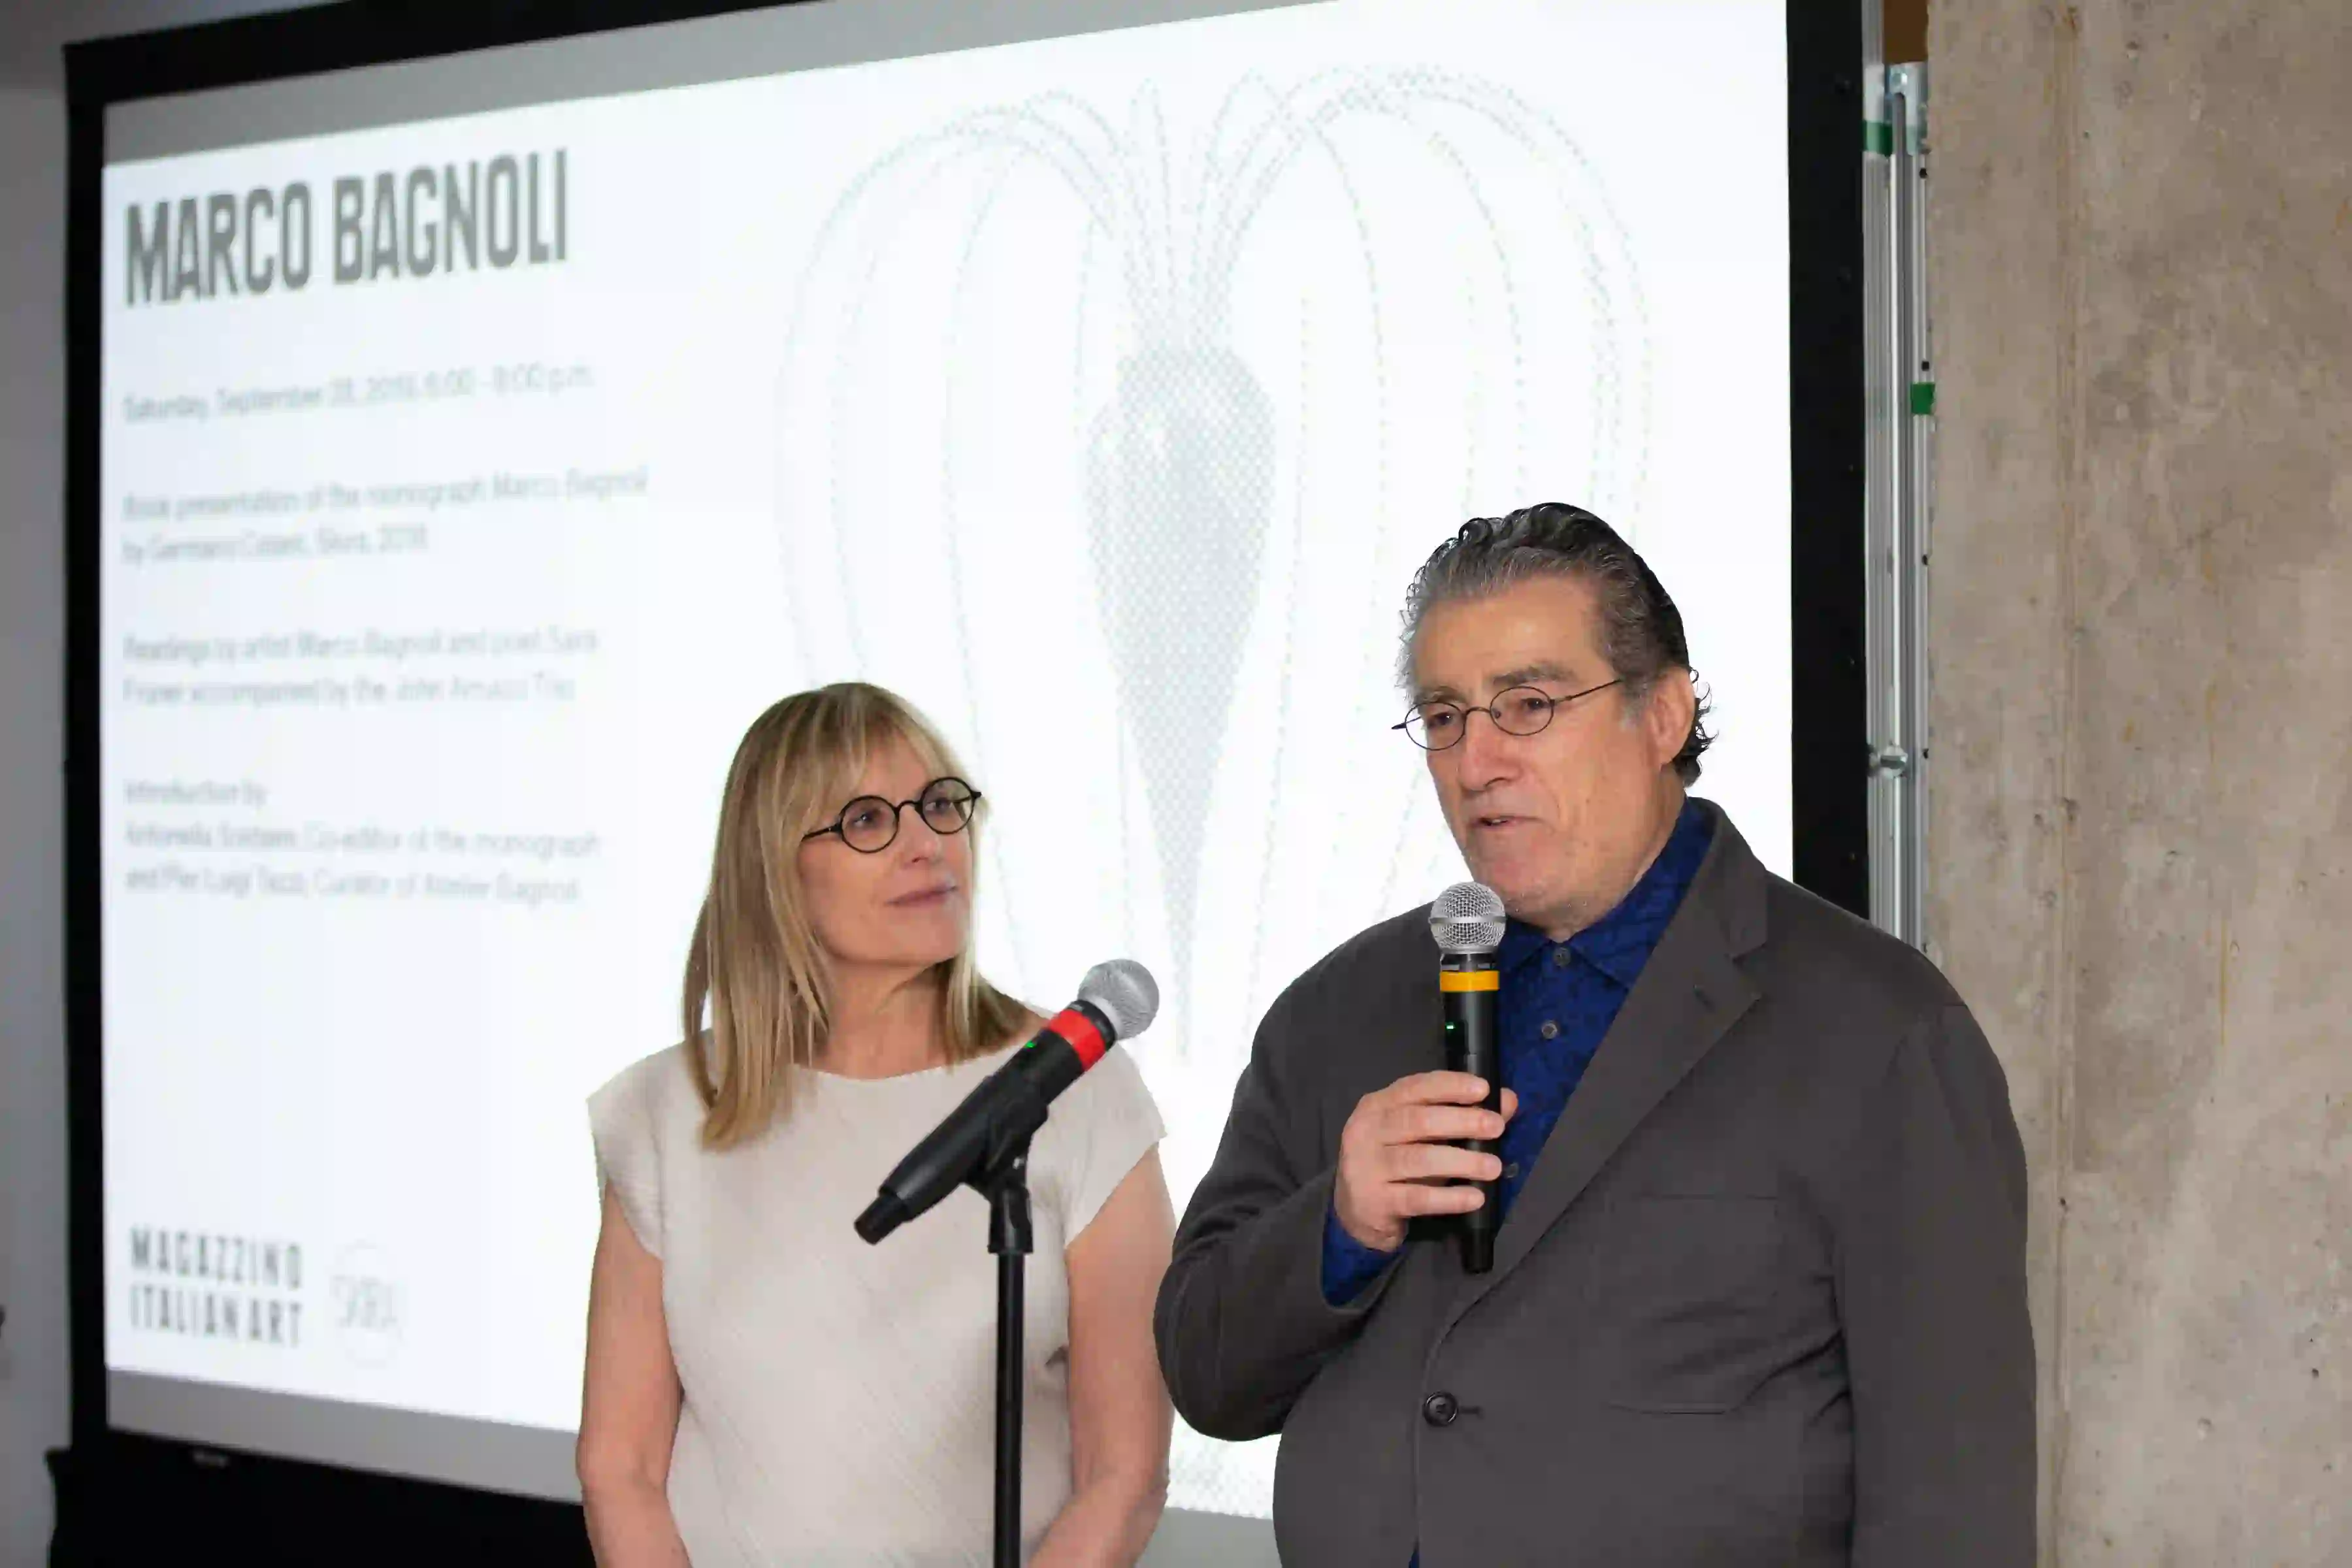 Co-founders Nancy Olnick and Giorgio Spanu at the Book presentation of "Marco Bagnoli," 2019